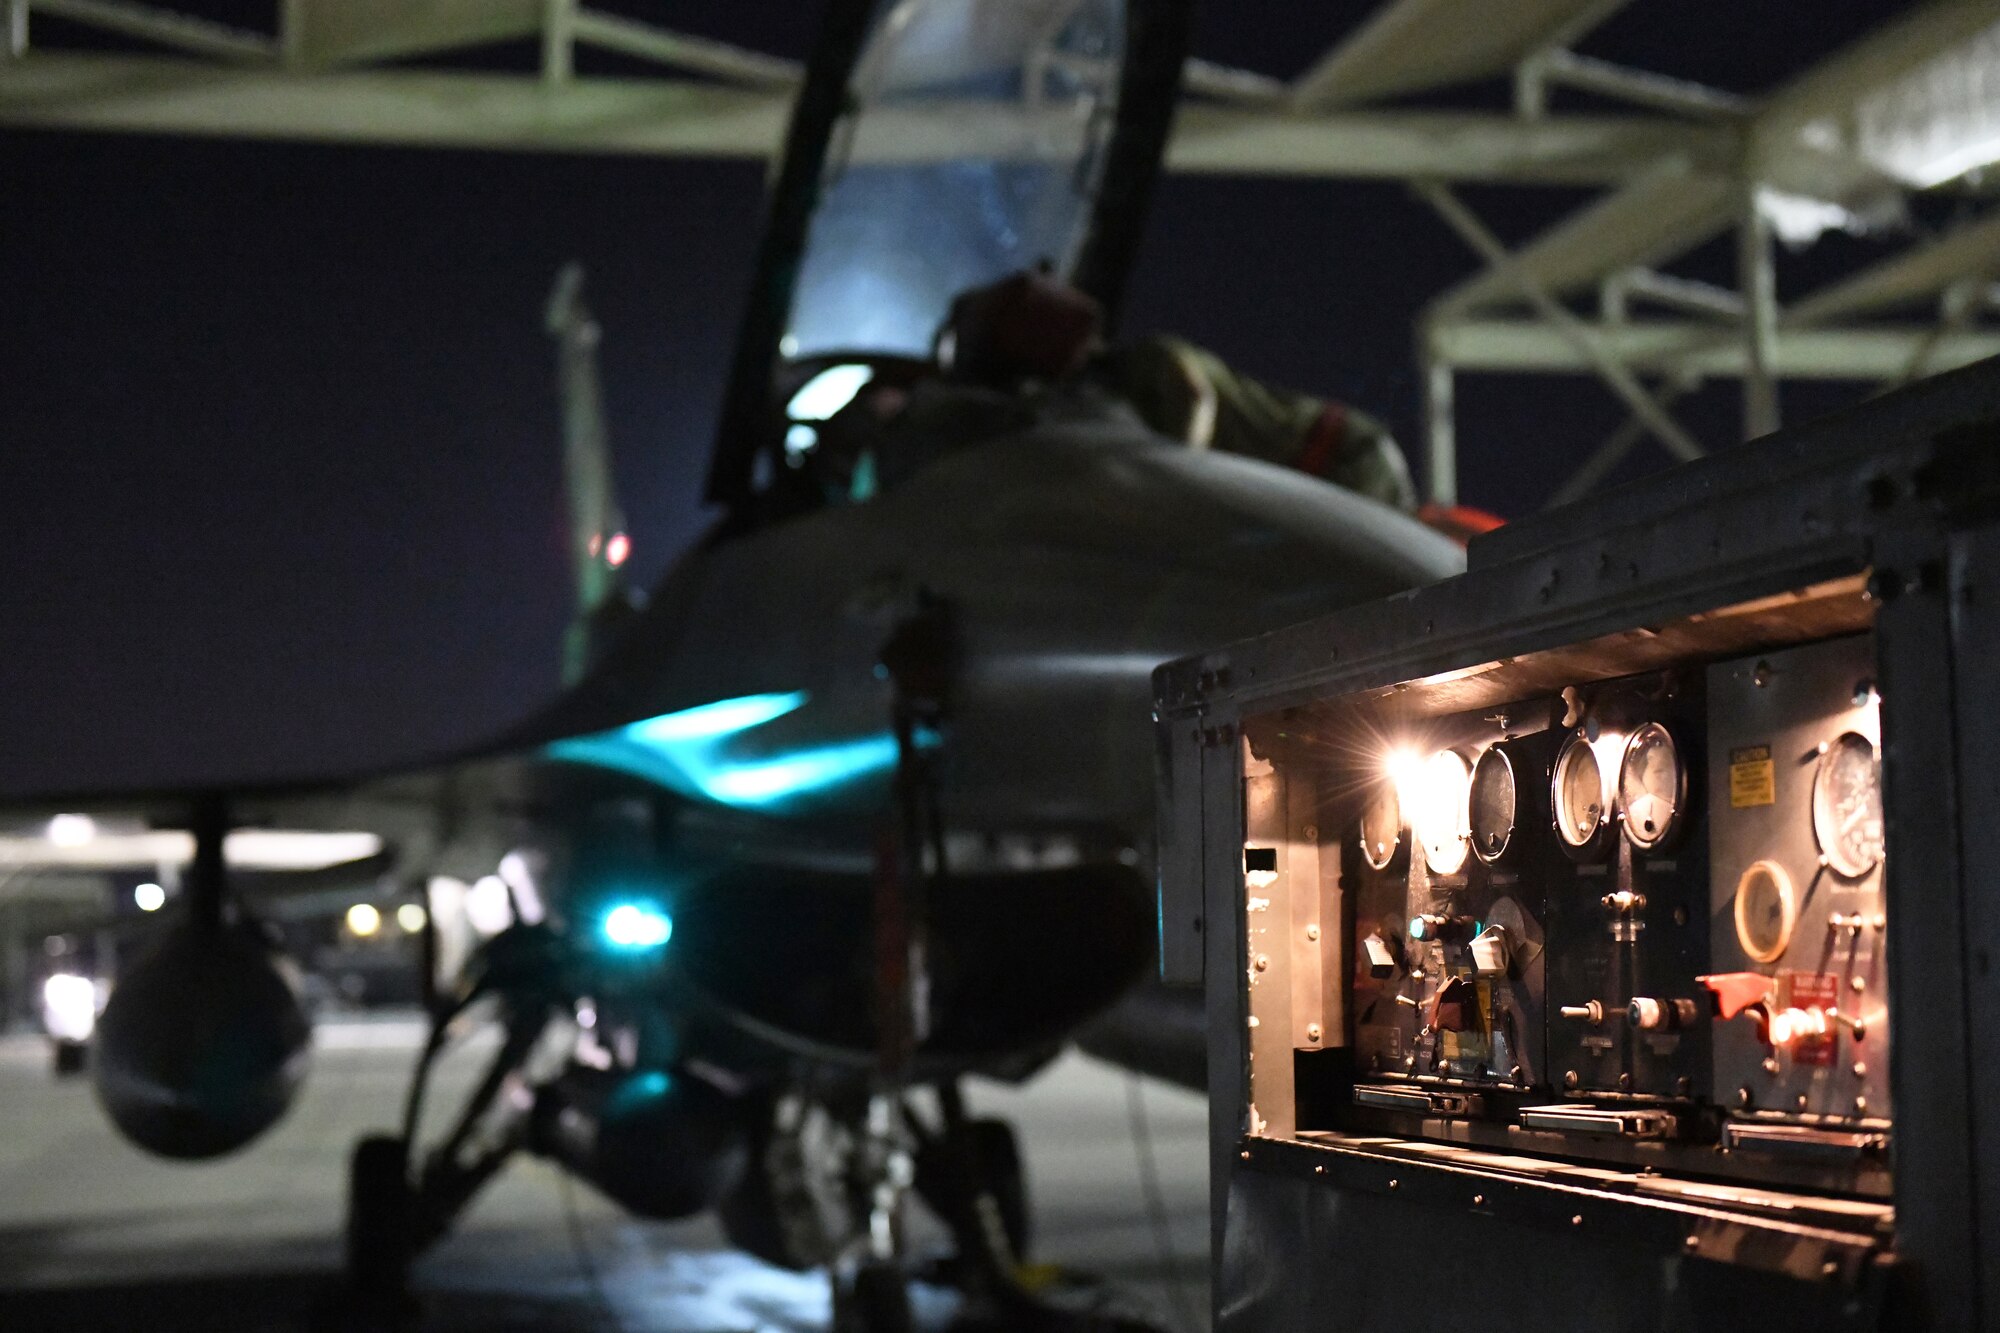 Airmen assigned to the 310th Aircraft Maintenance Unit perform maintenance on an F-16 Fighting Falcon, June 24, 2020, at Luke Air Force Base, Ariz.